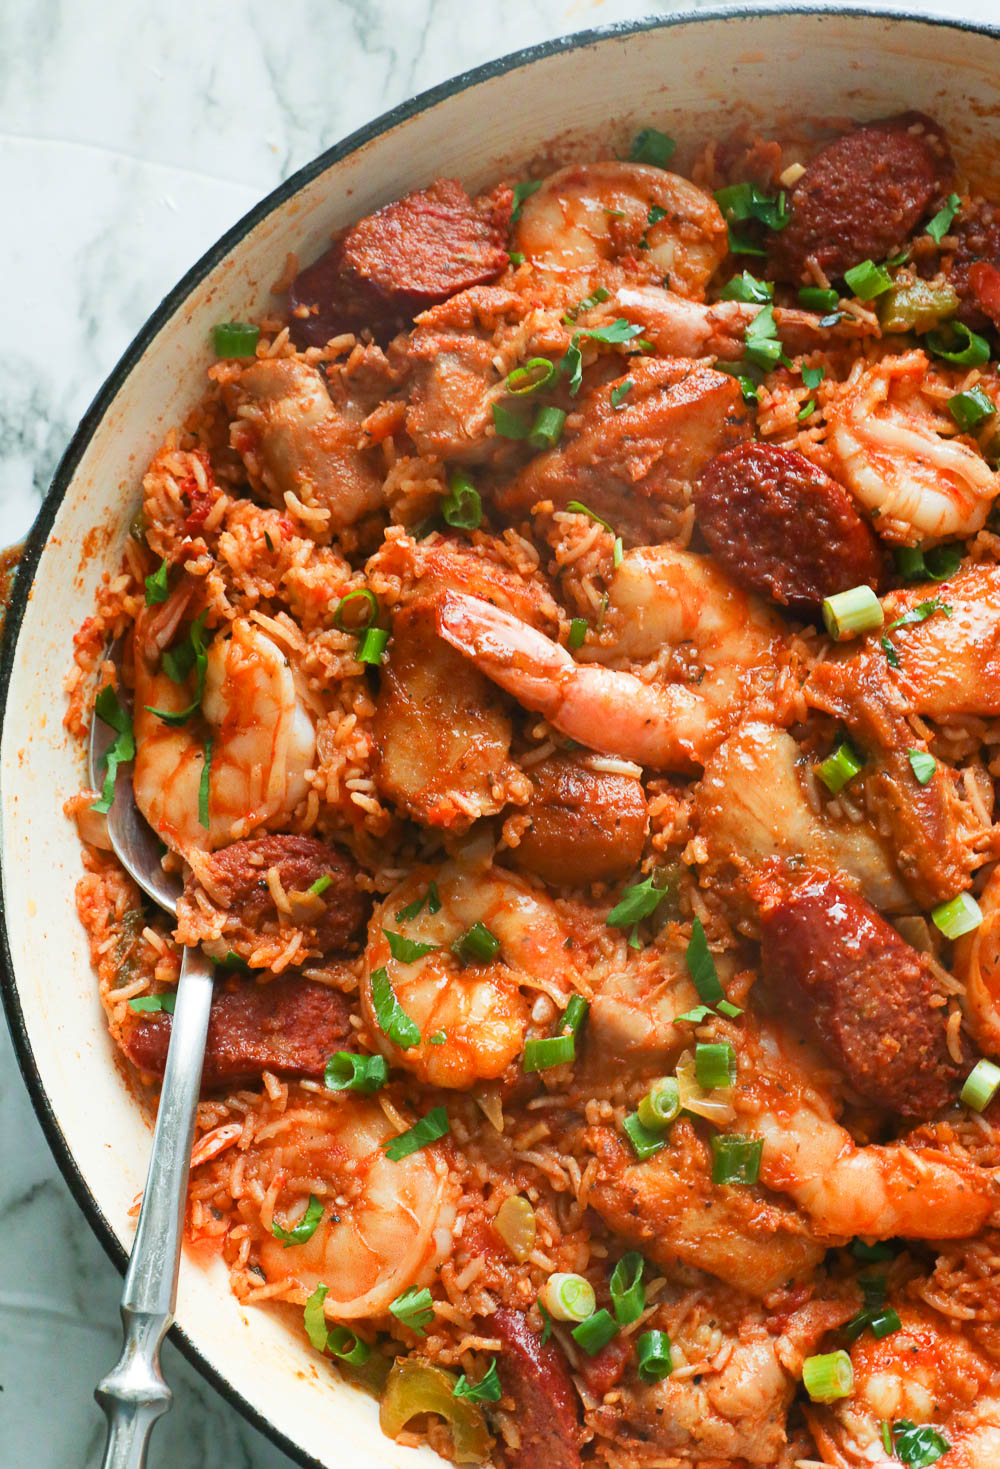 A pan of jambalaya garnished with green onions and a spoon ready to serve it with.